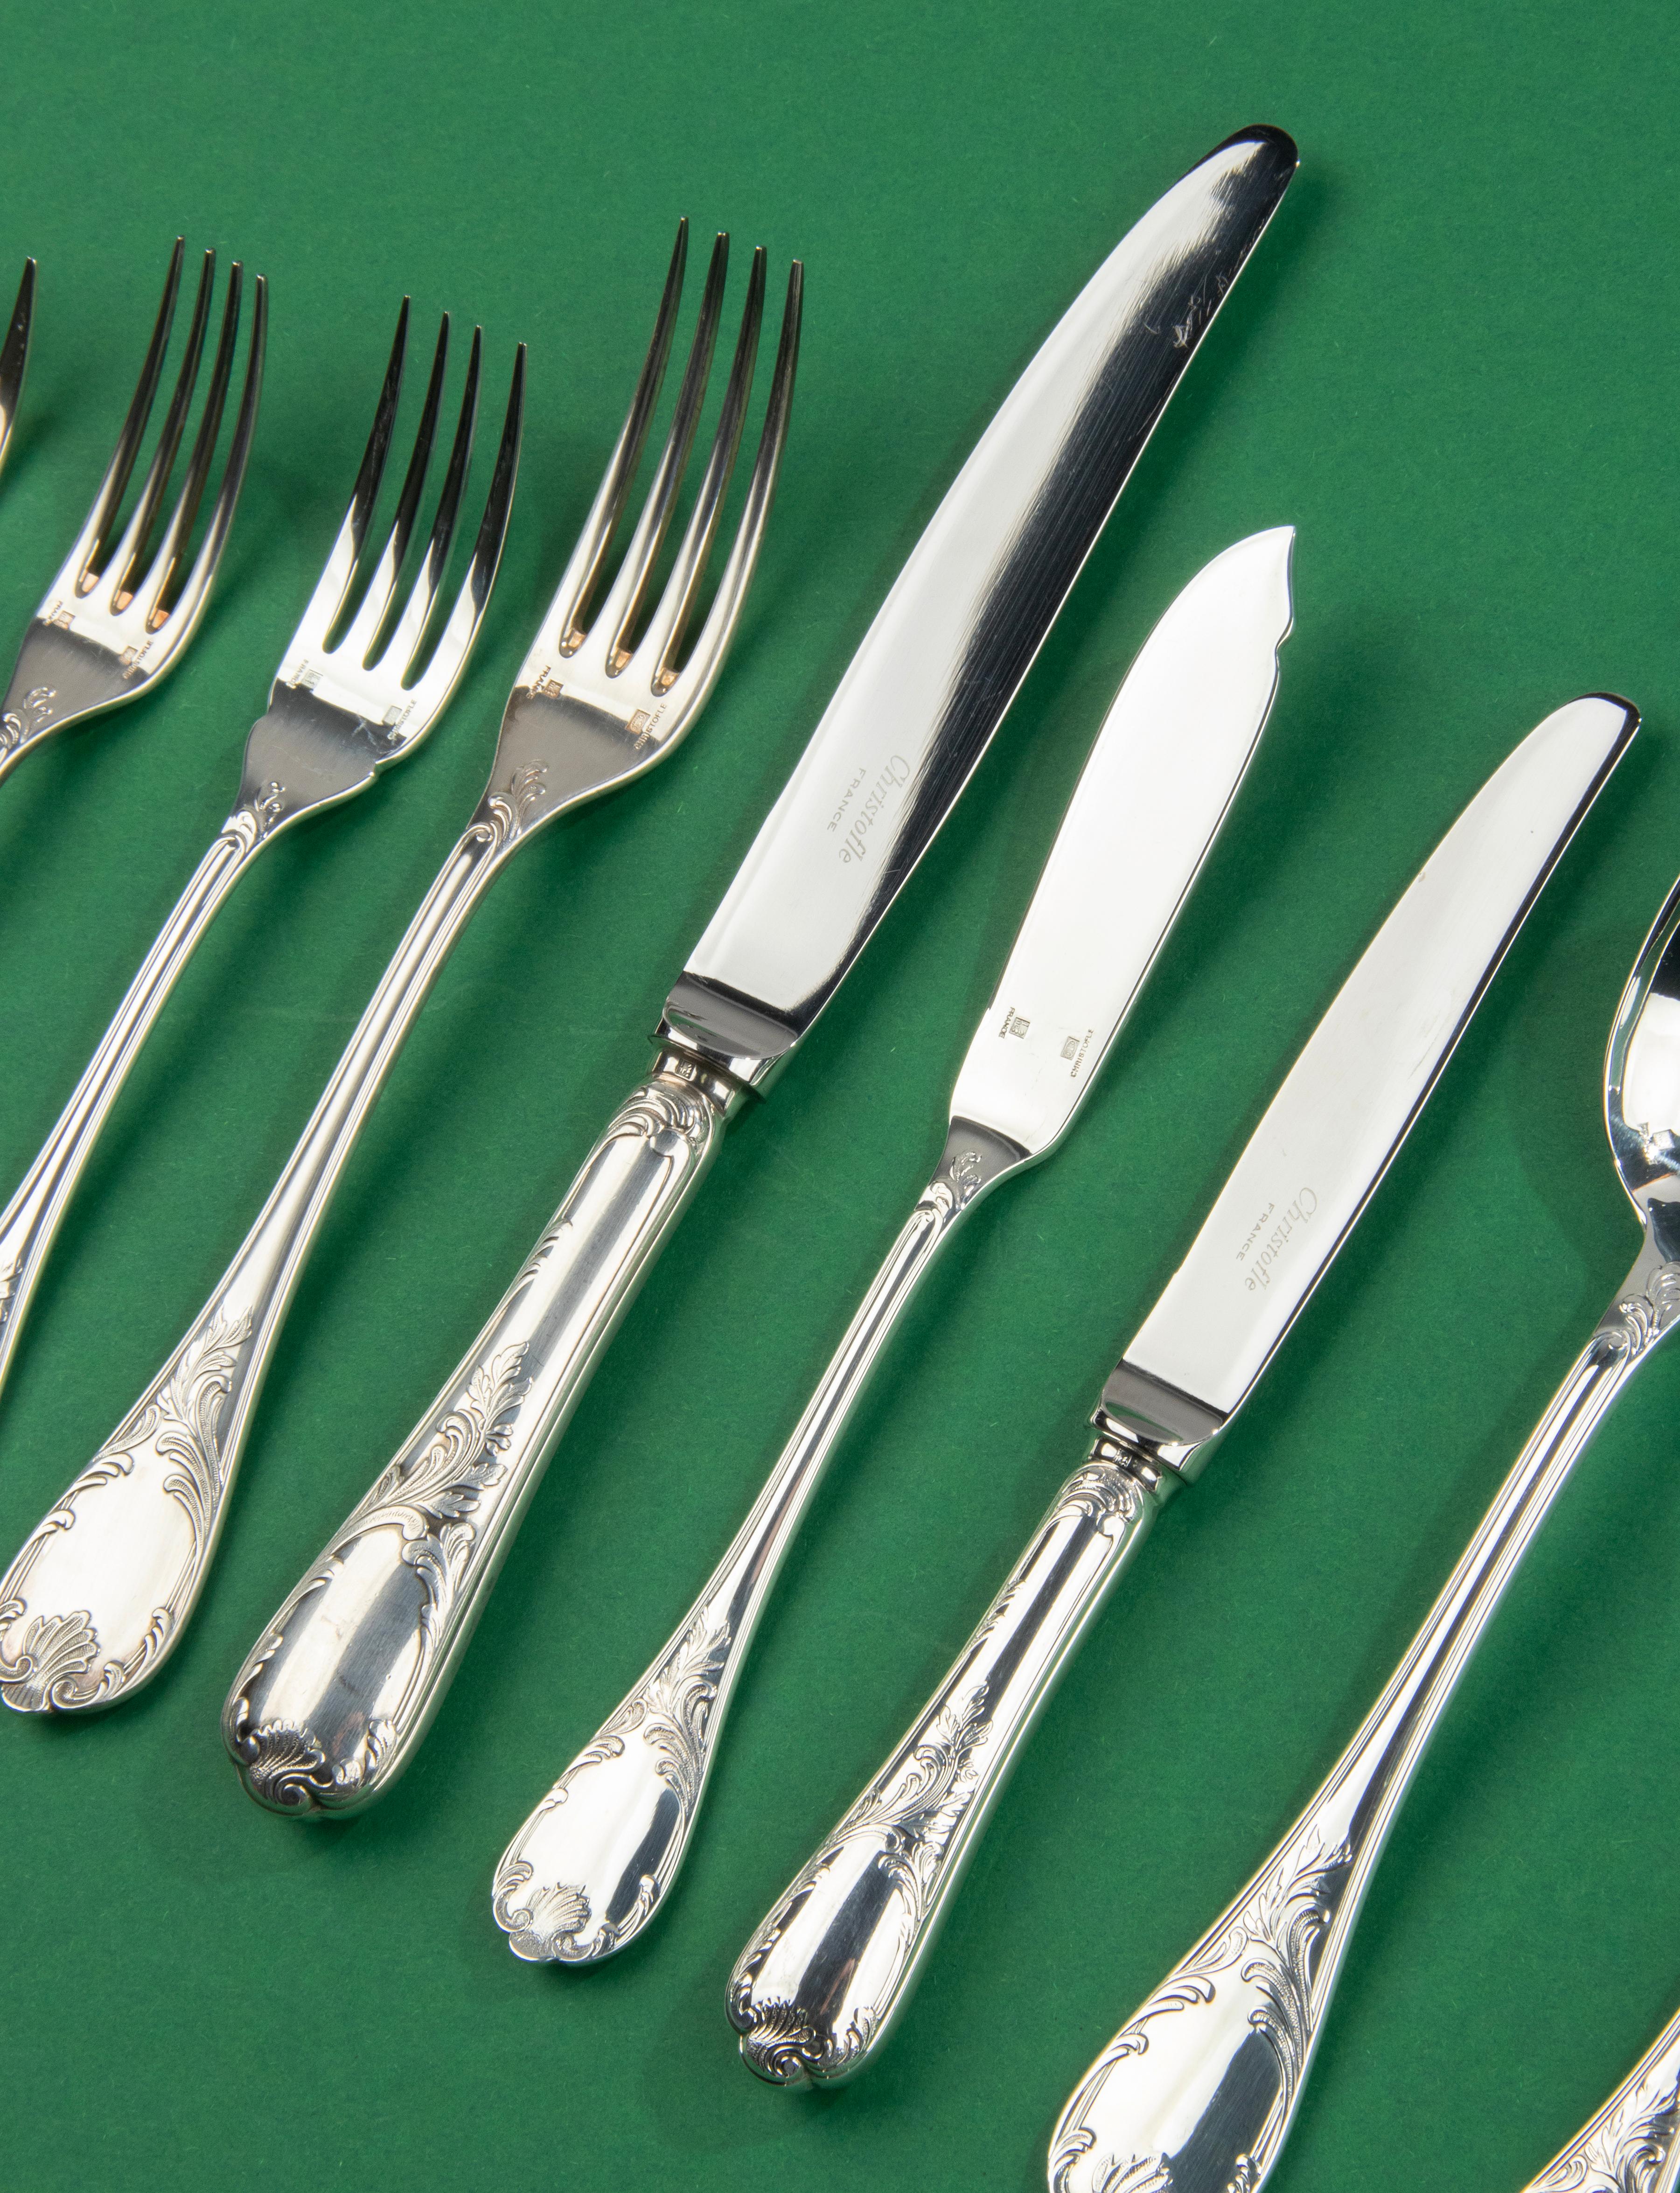 60-Piece Set Silver Plated Flatware - Christofle France - Model Marly 2